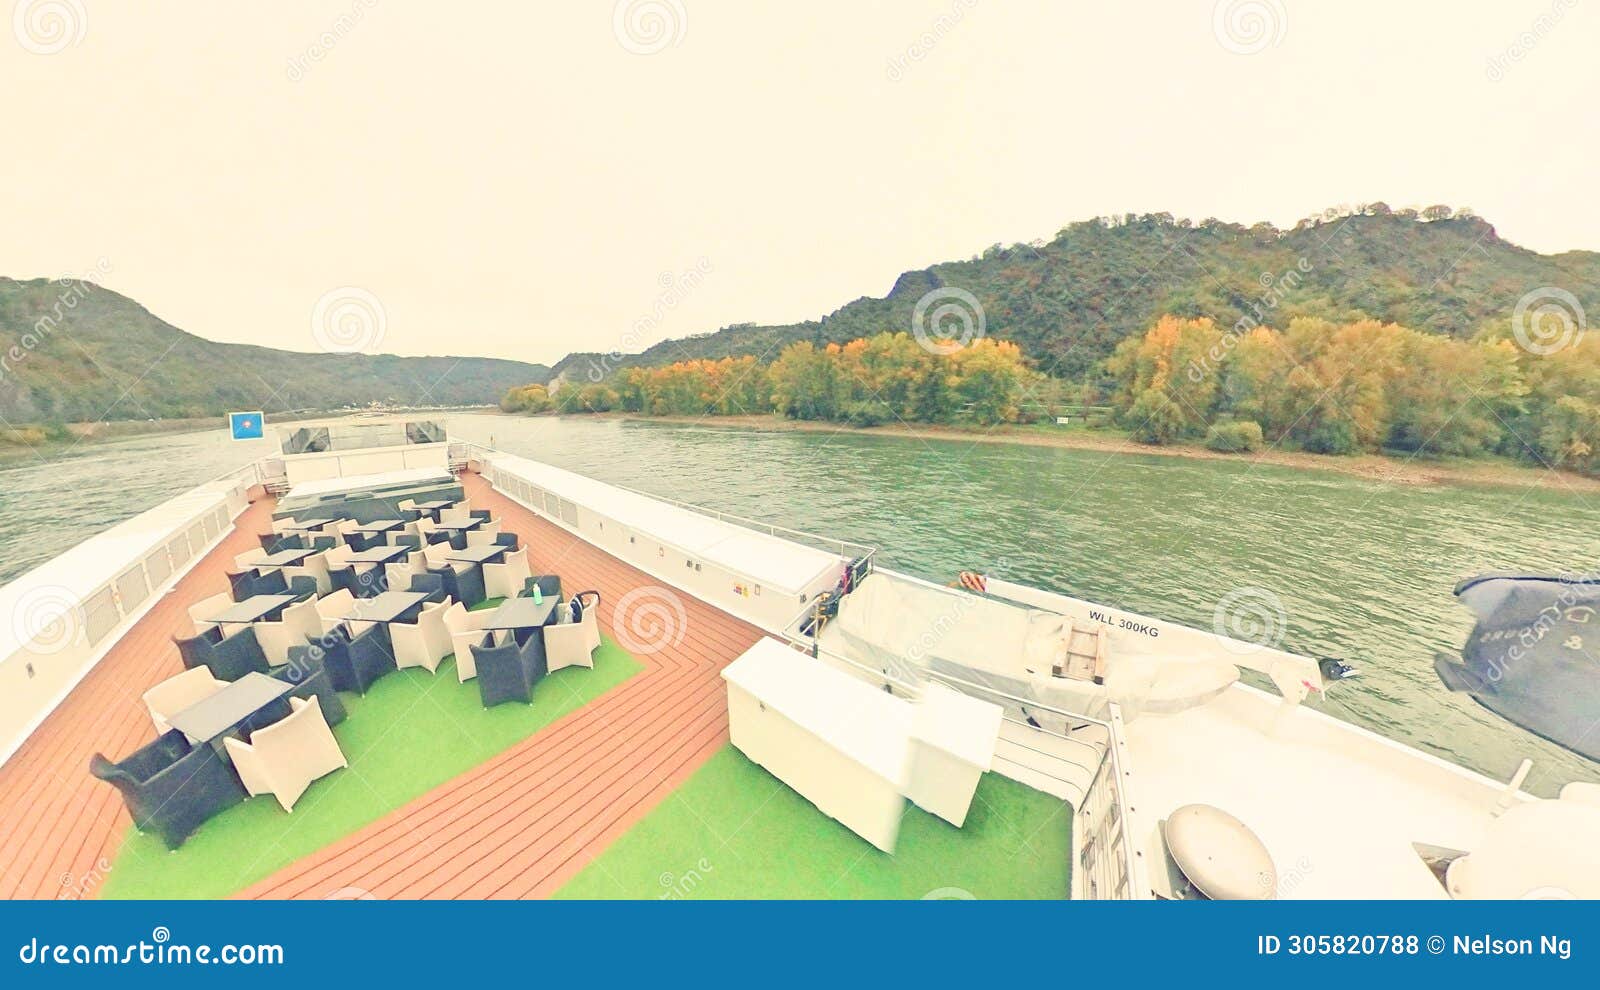 beautiful sceneries, historical houses castles , commercial ships along rhine danube river